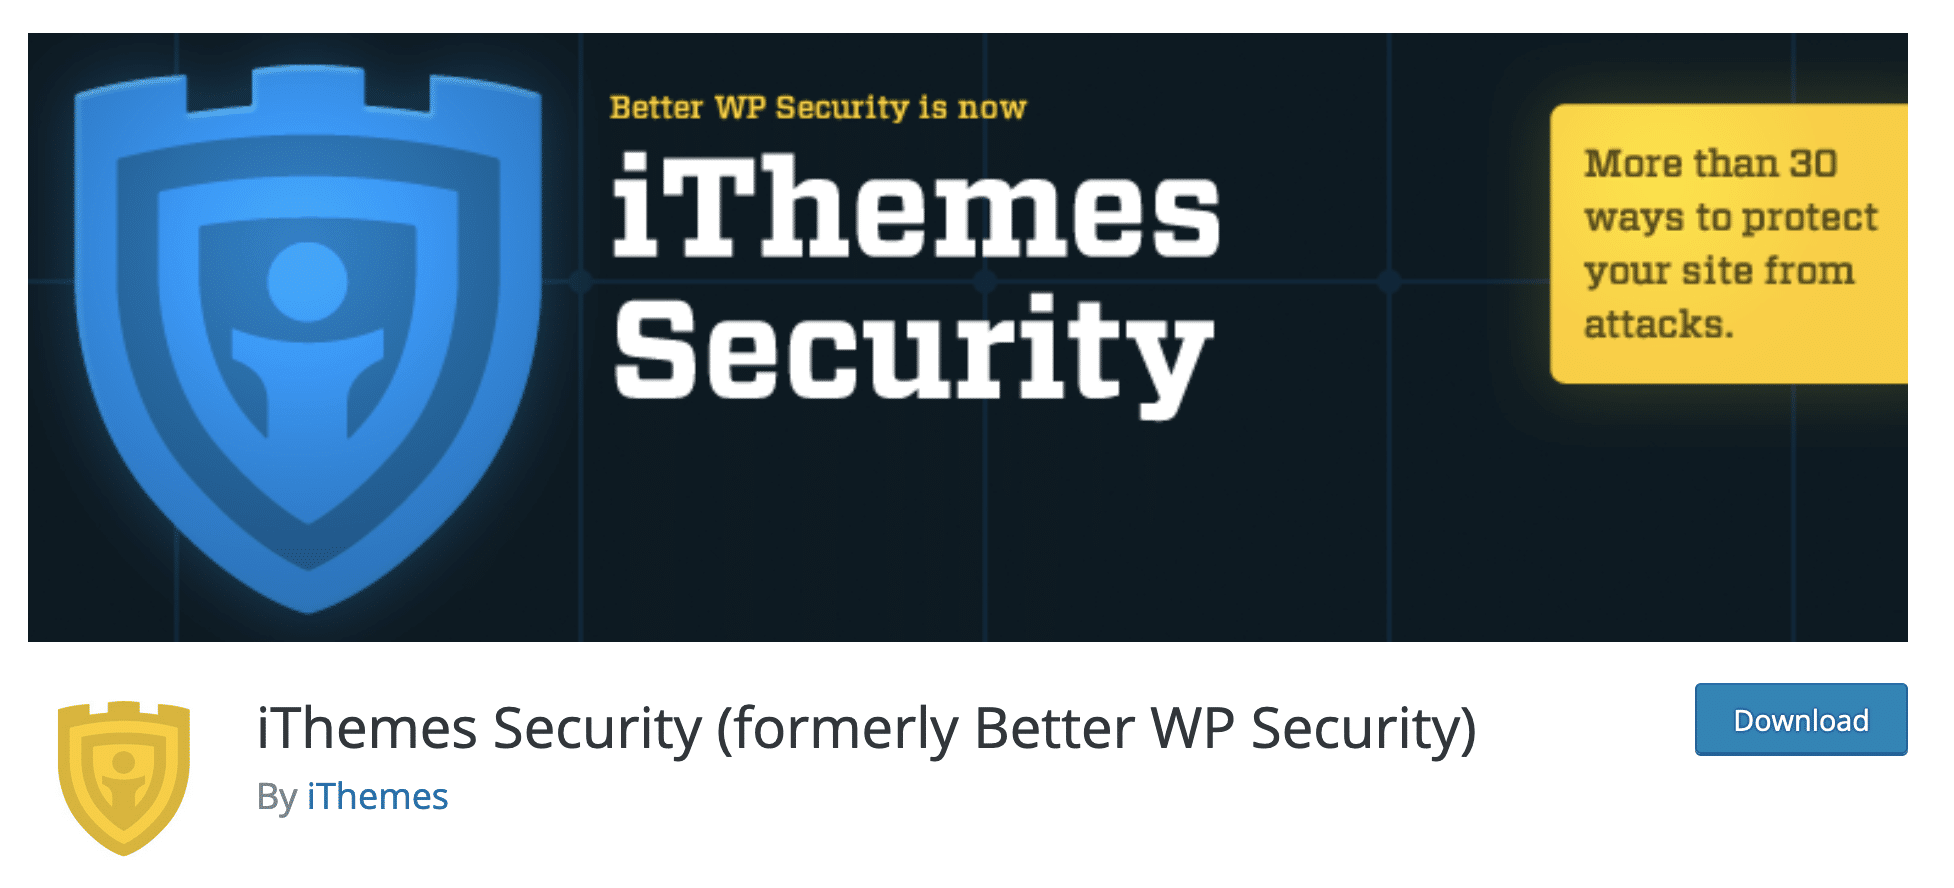 The iThemes Security plugin helps to fight against brute force attacks on WordPress.